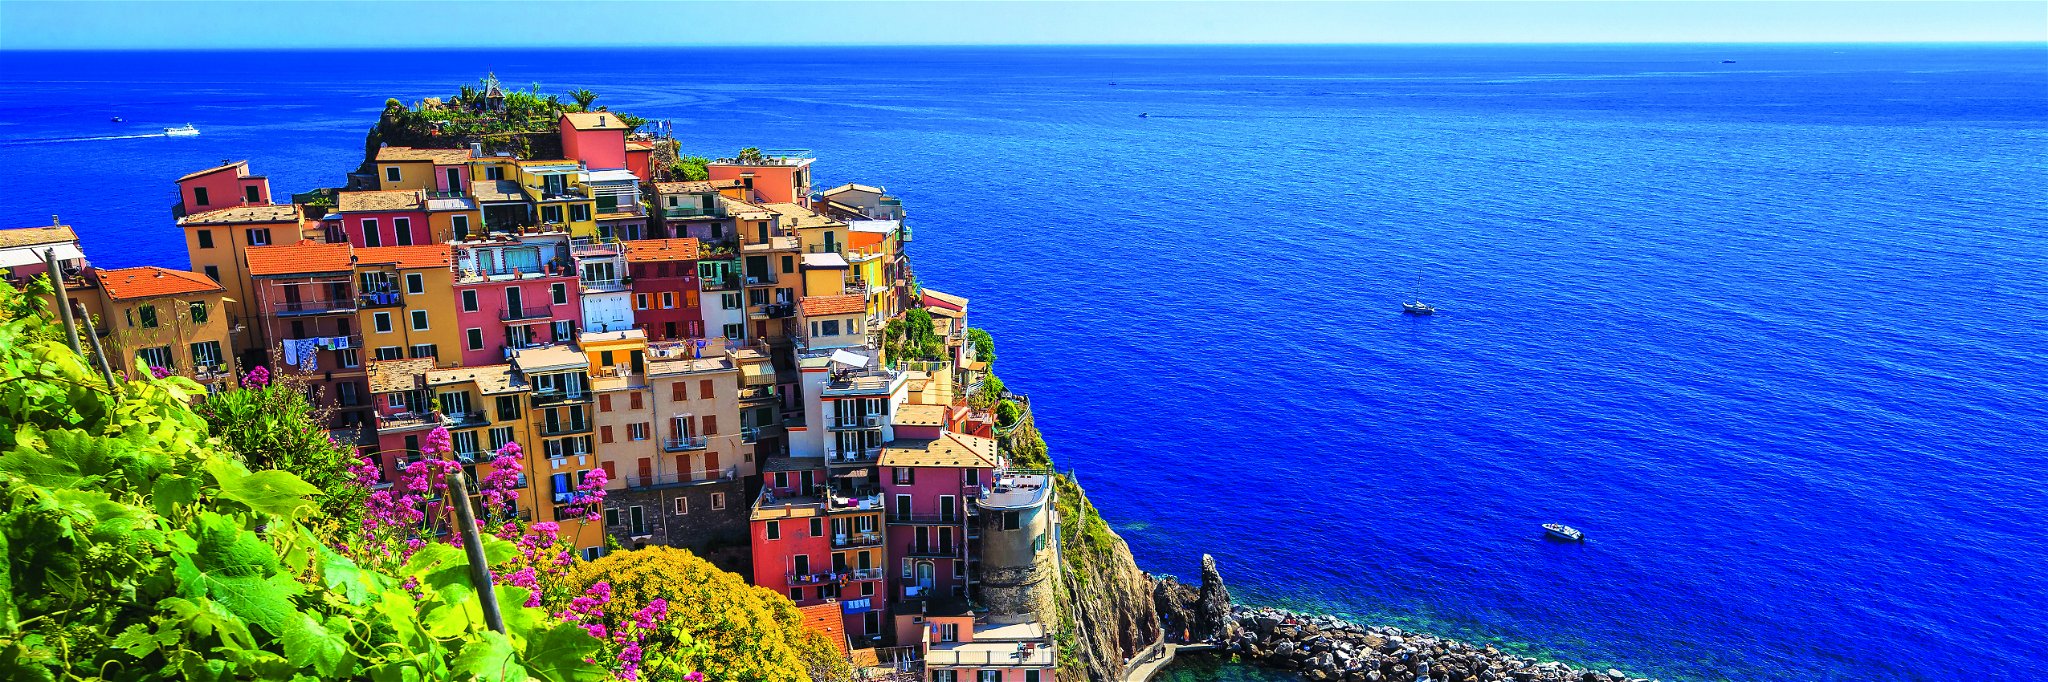 Vermentino is grown around the picturesque villages of the Cinque Terre.